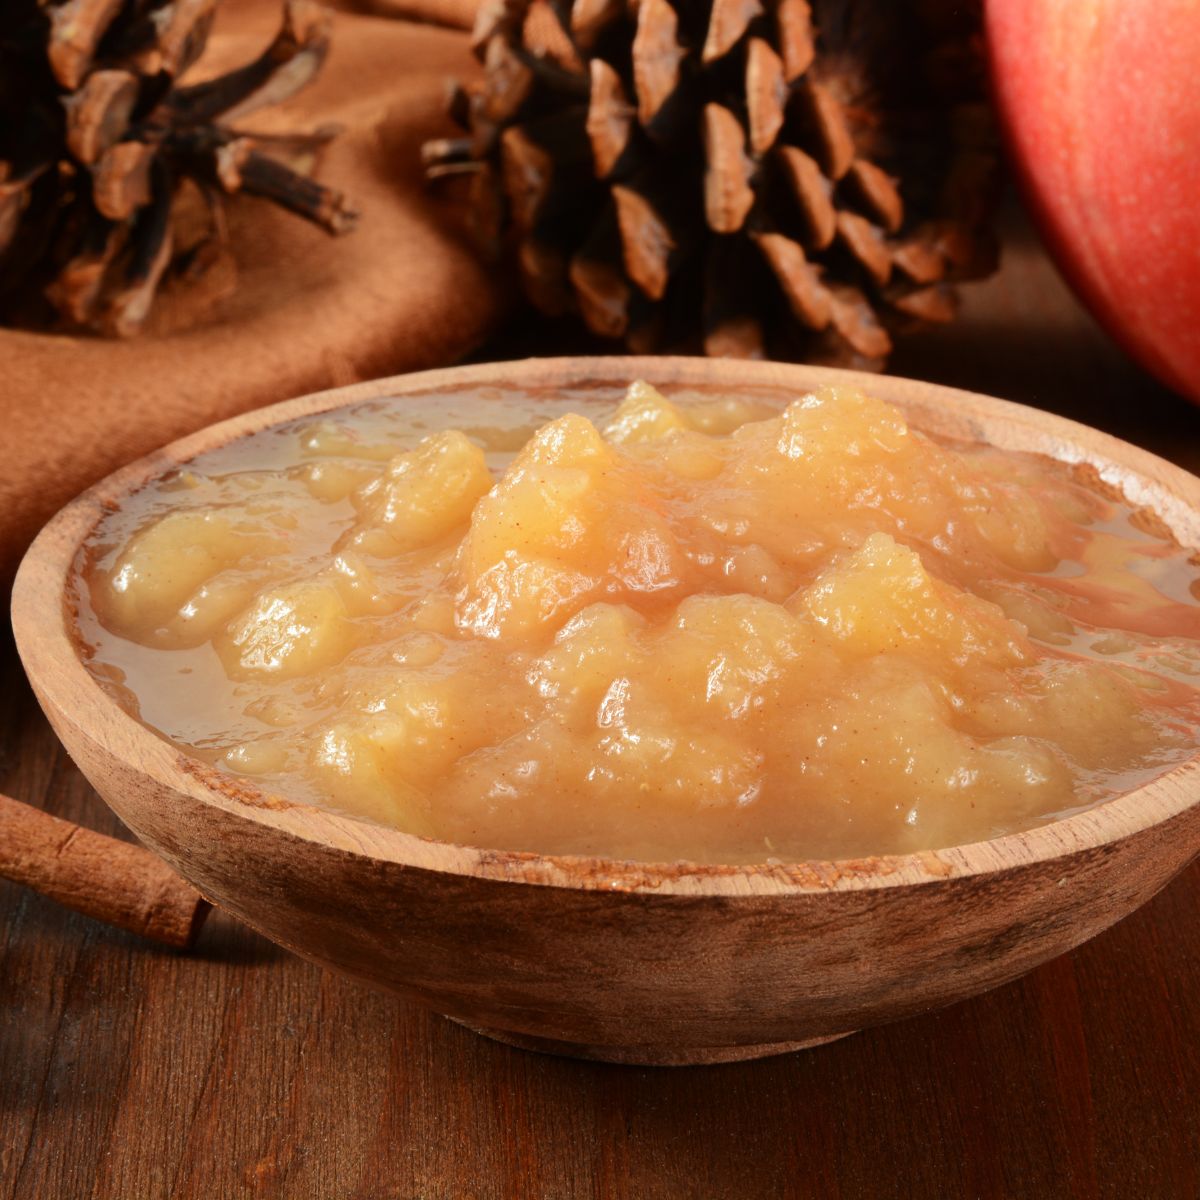 apple sauce in a wooden bowl